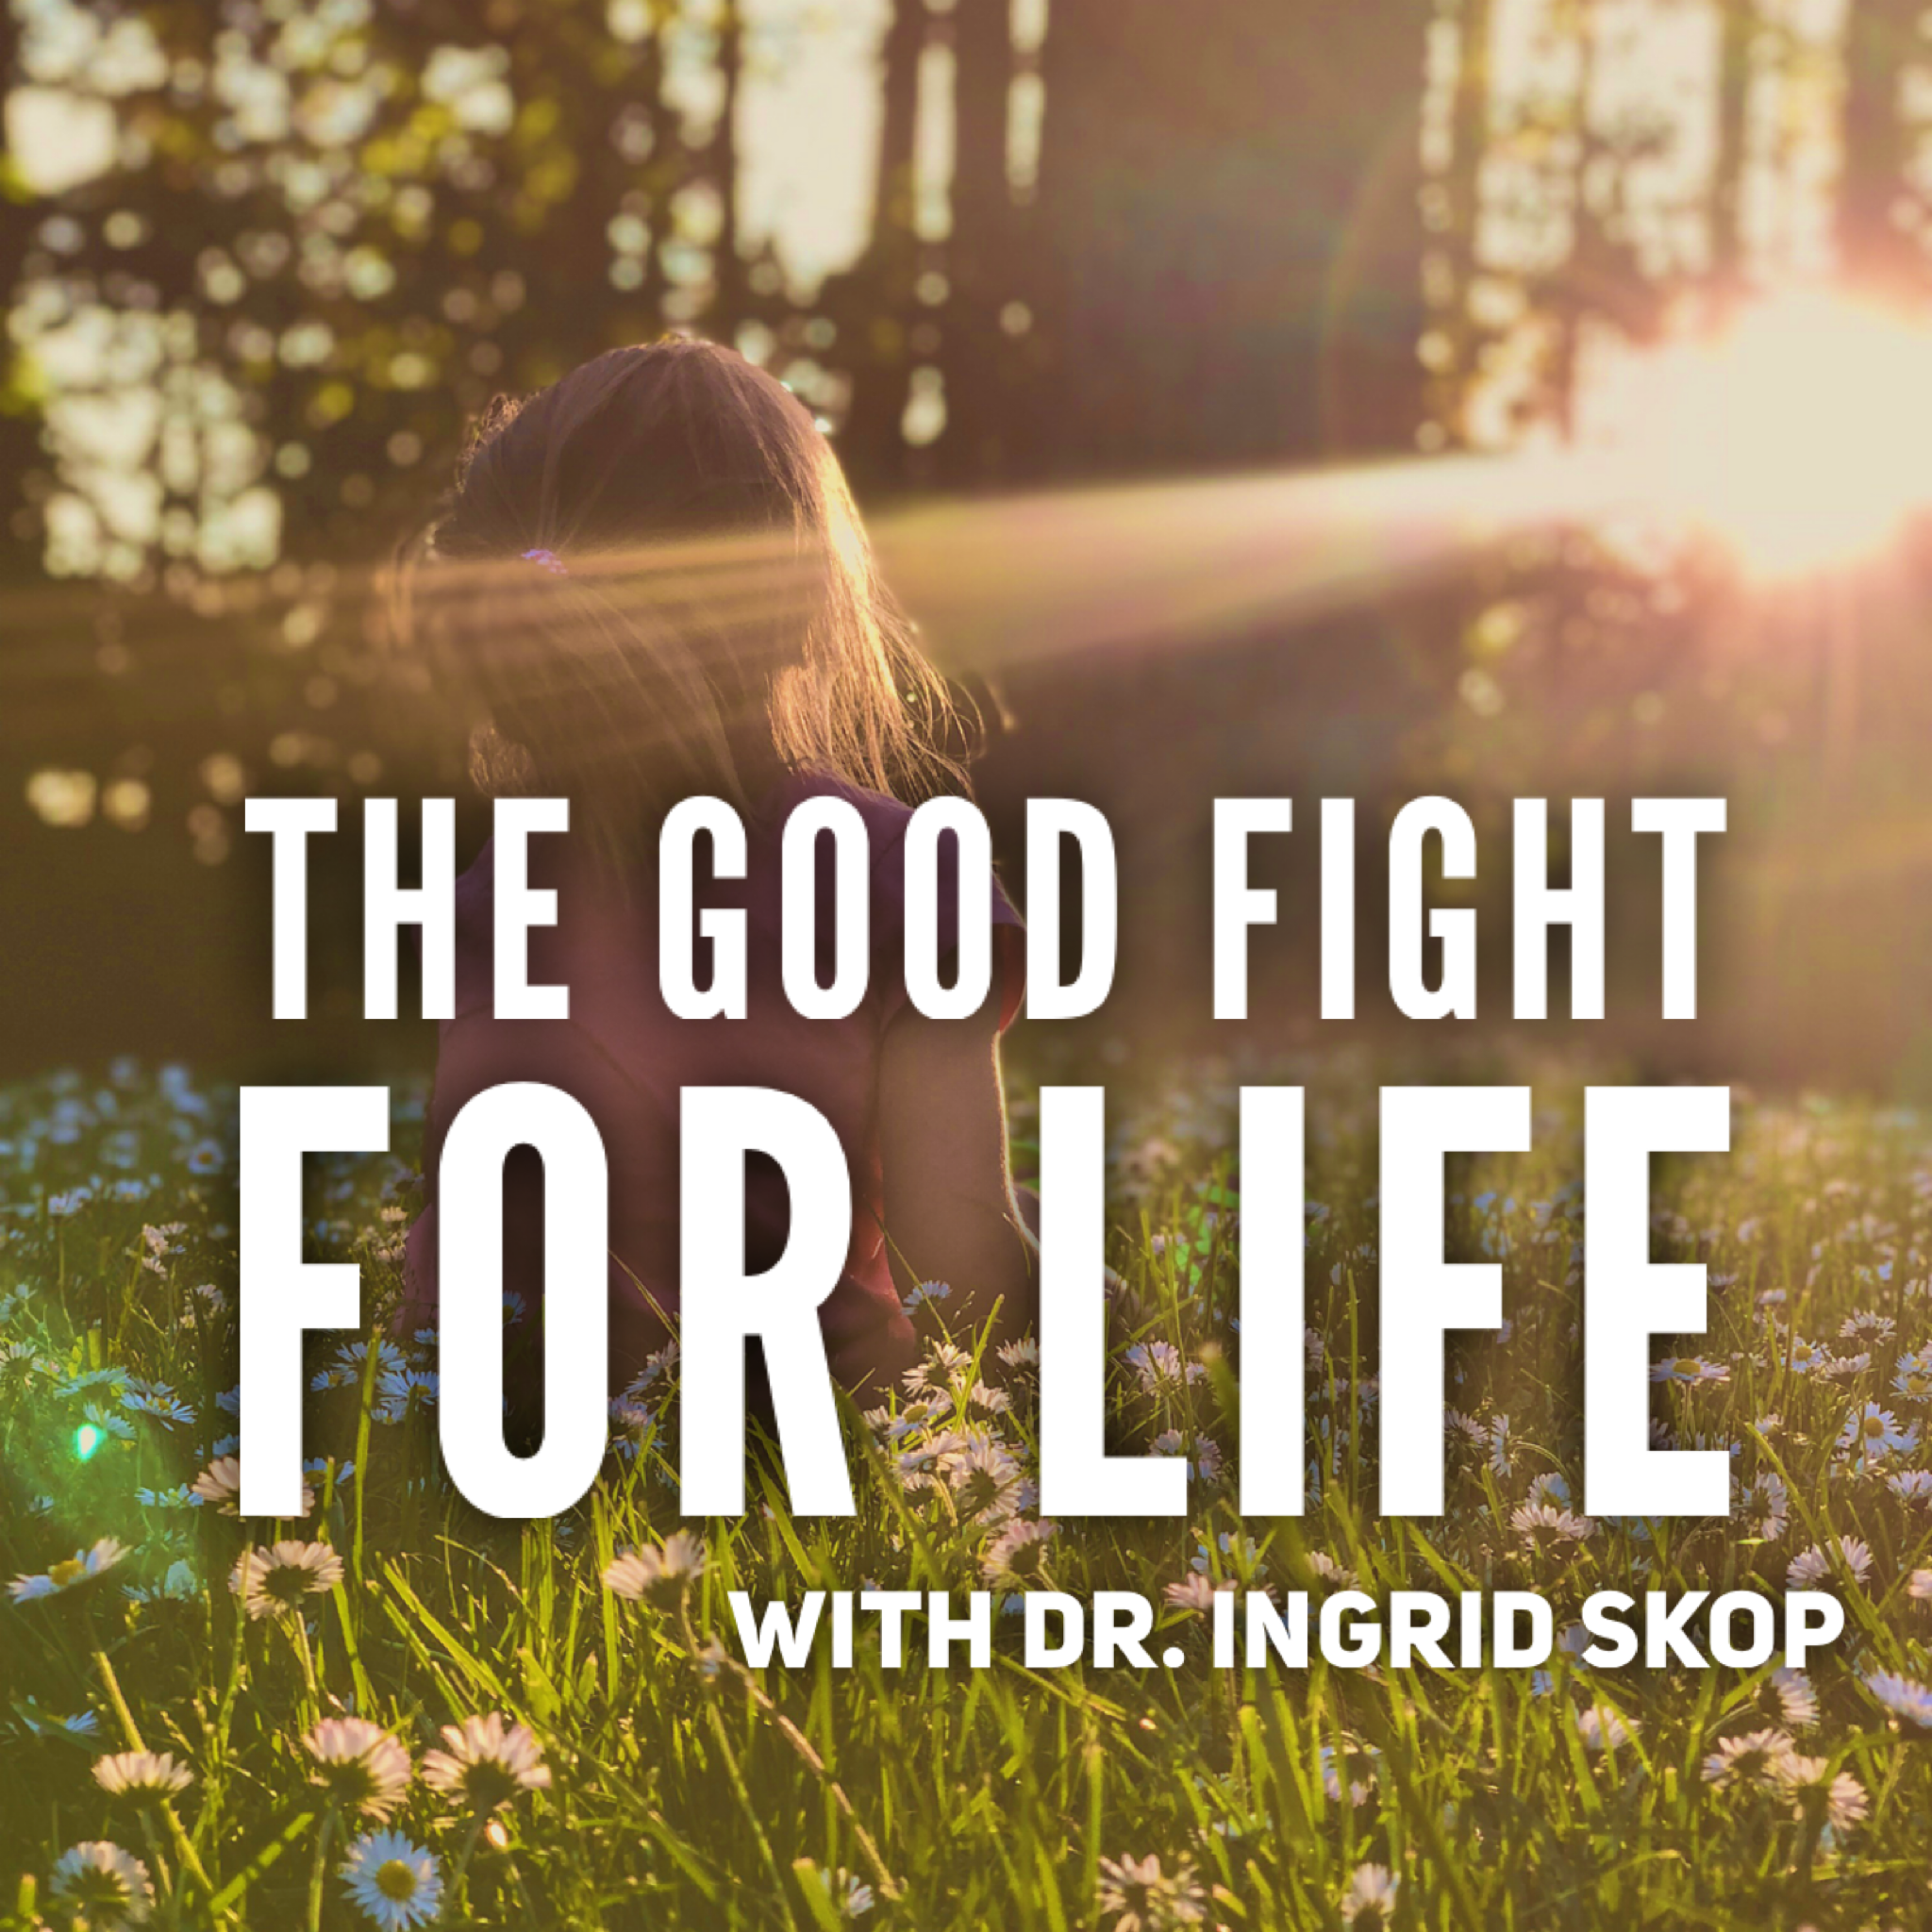 The Good Fight for Life with Dr Ingrid Skop